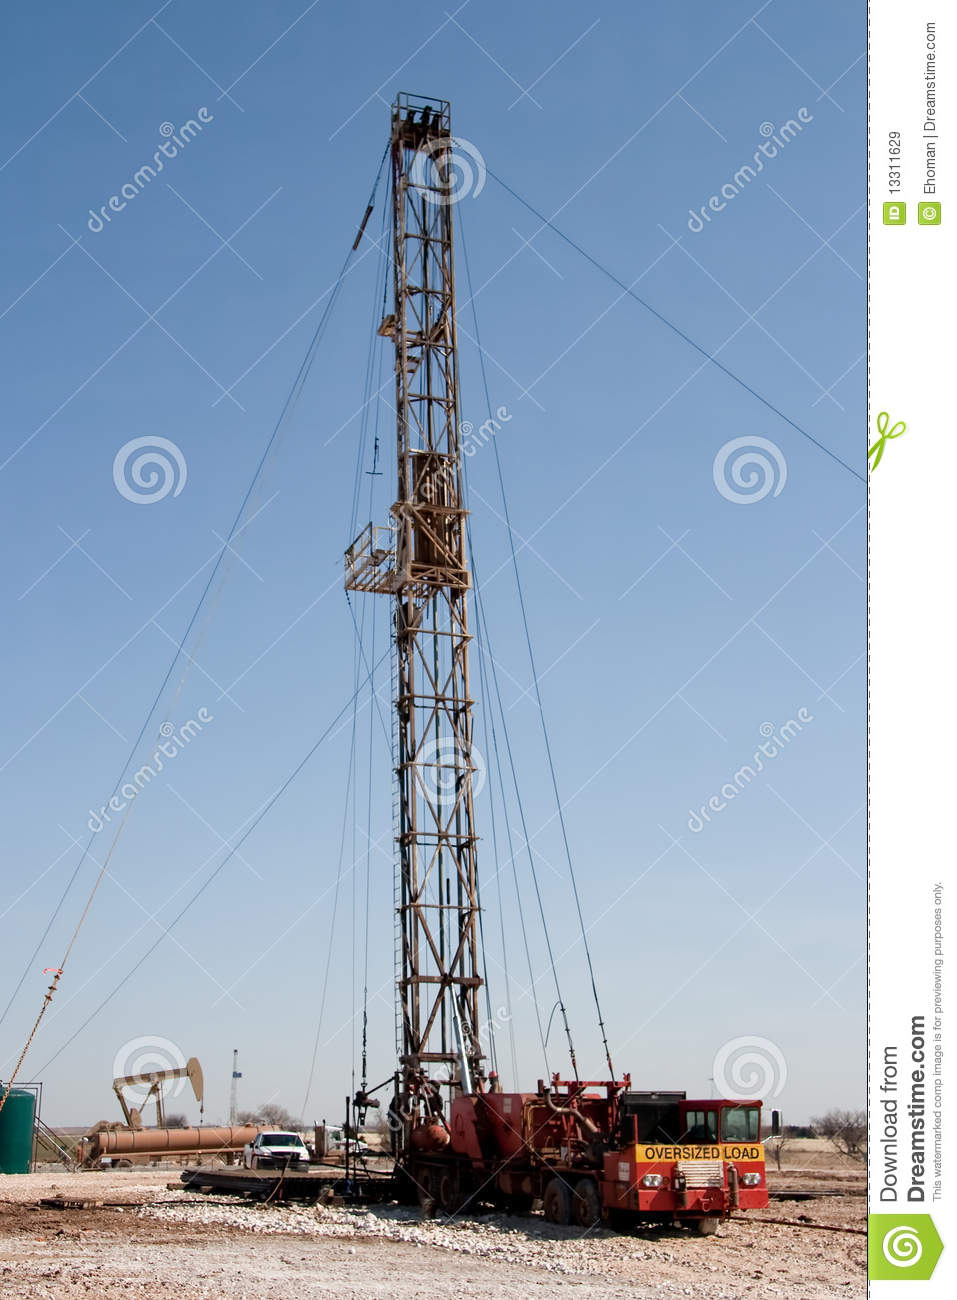 Work Over Rig Pumpjack And A Drilling Rig Royalty Free Stock Images